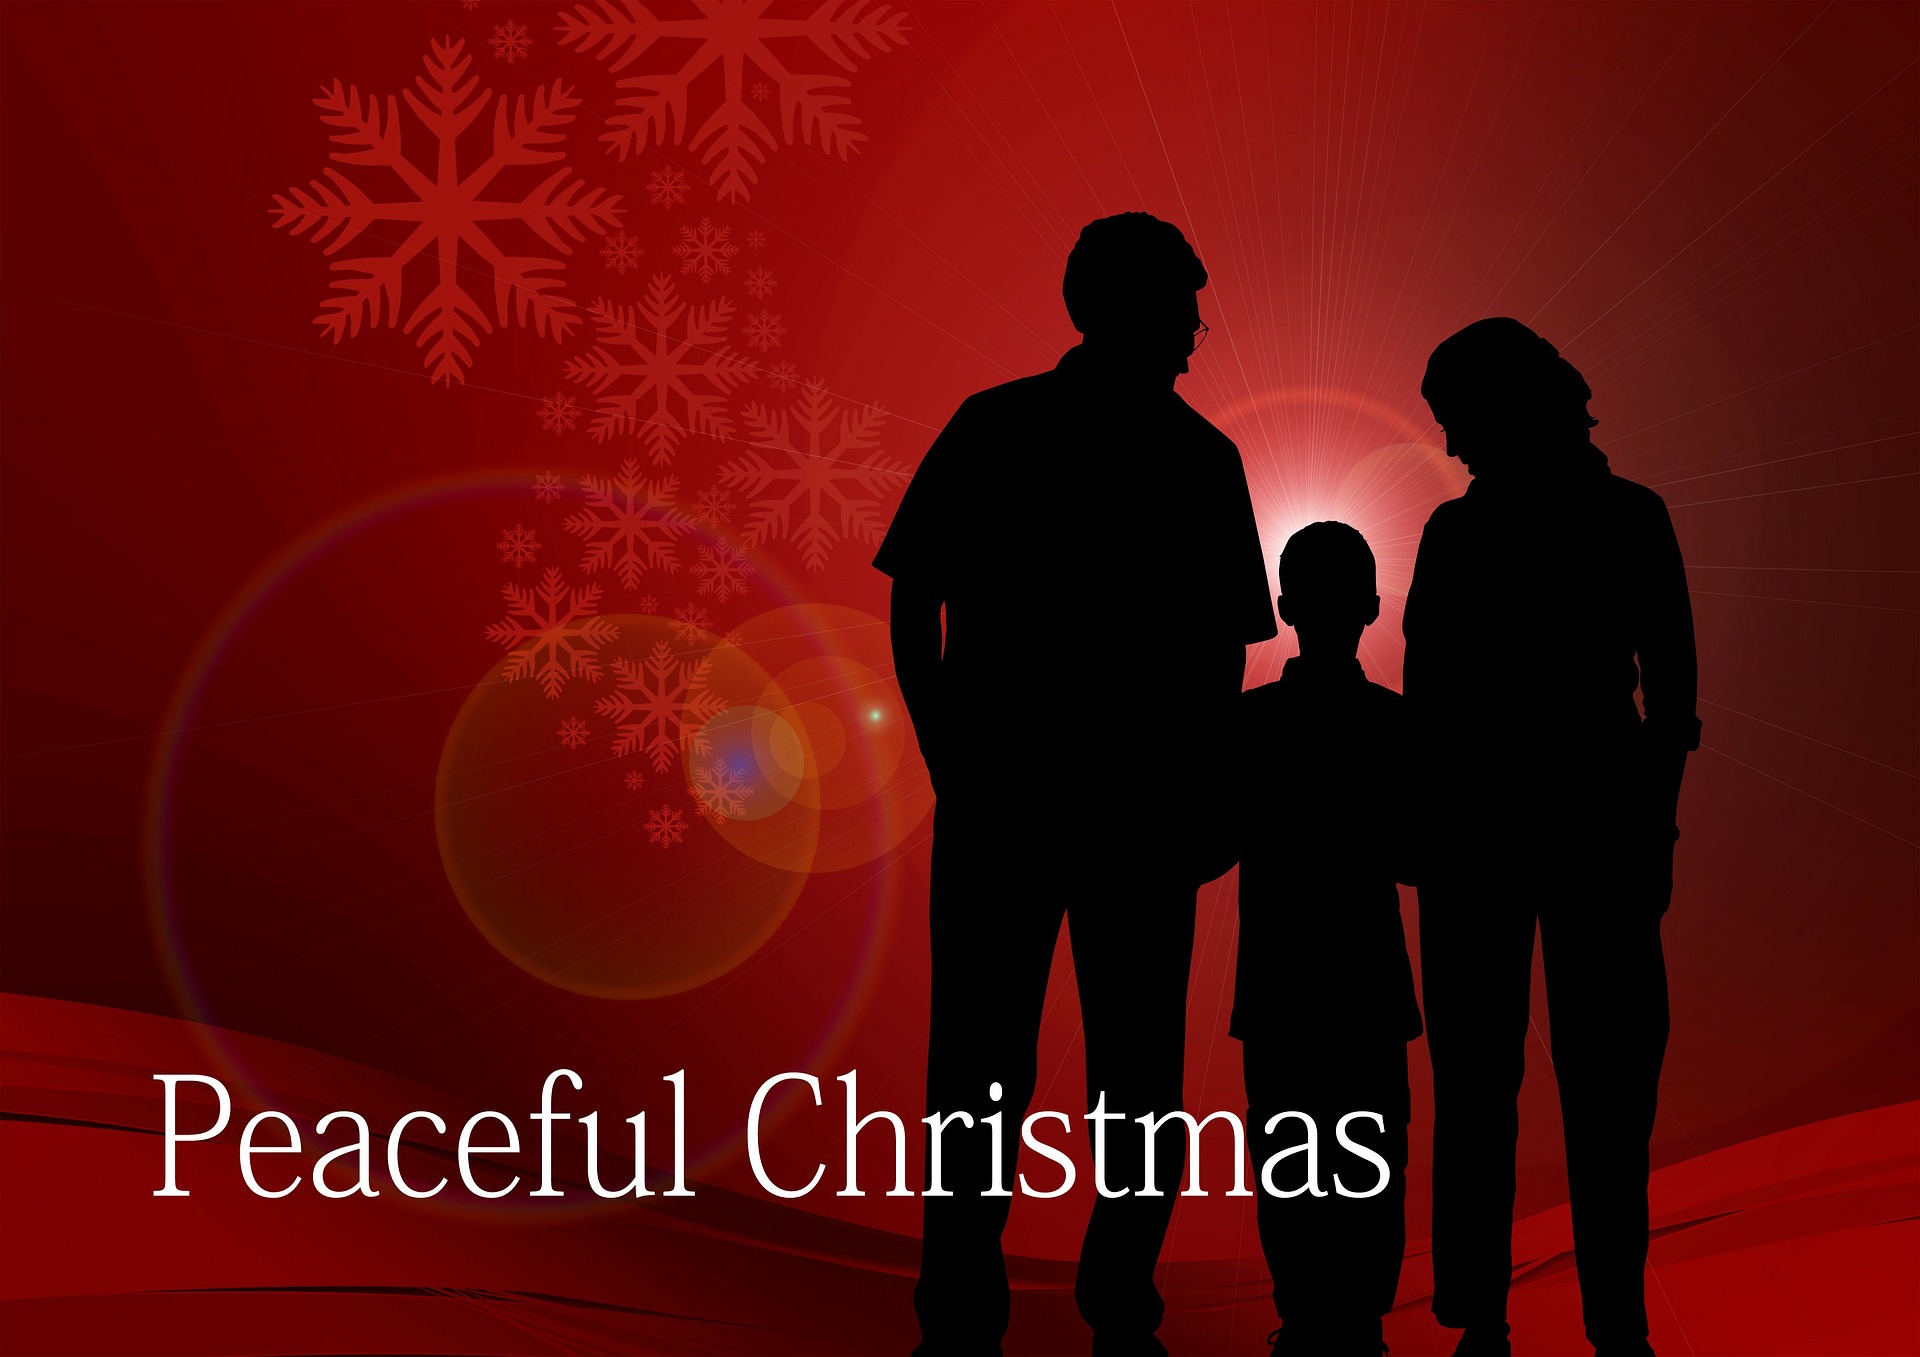 Christmas A Time For Joy And Togetherness Brings Peace And Health